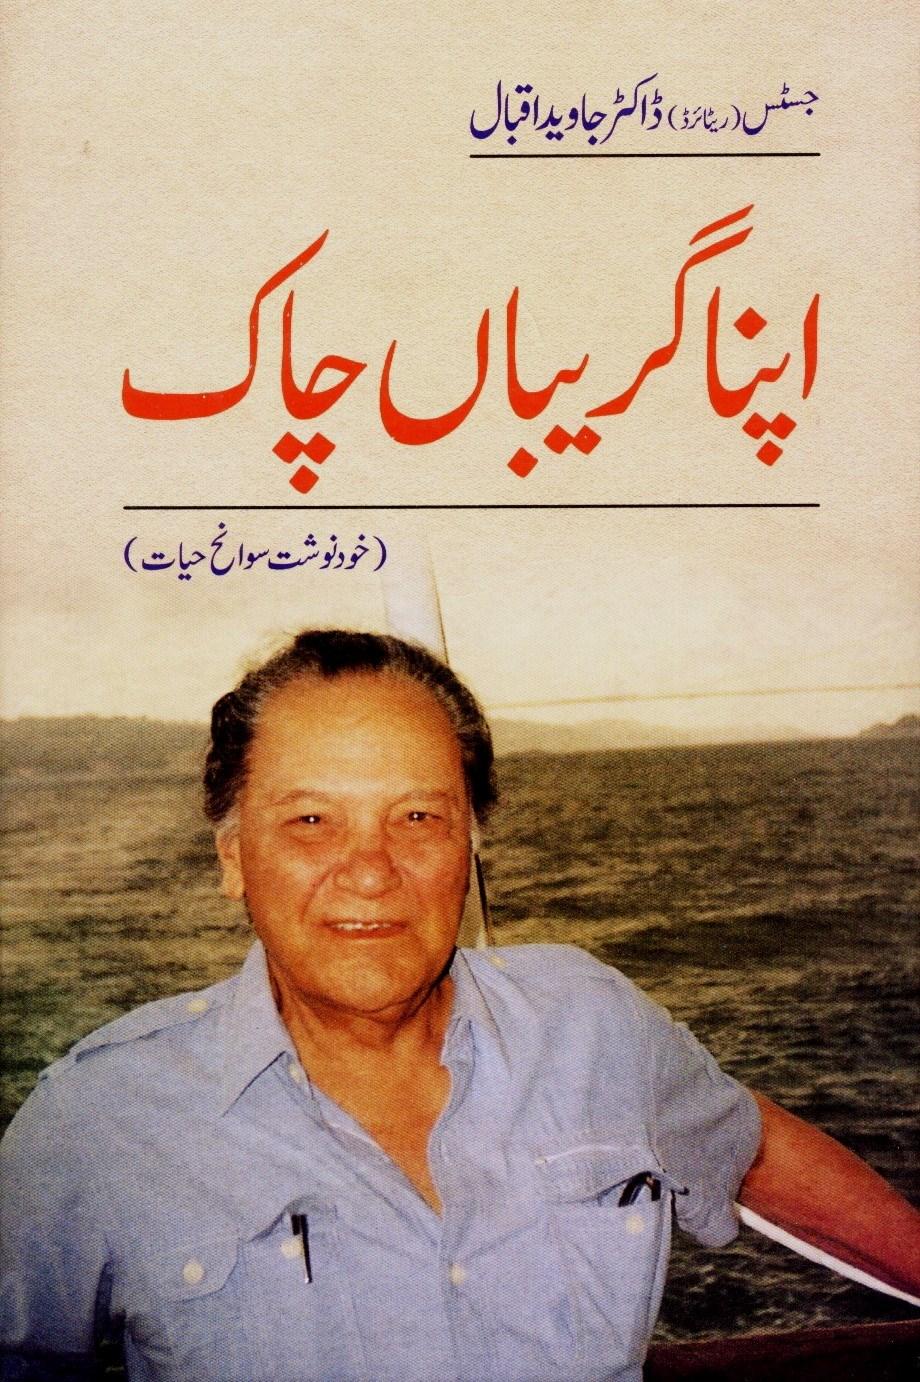 Suggested Reading. Apna Greban Chaak By Justice (R) Dr. Javed Iqbal.